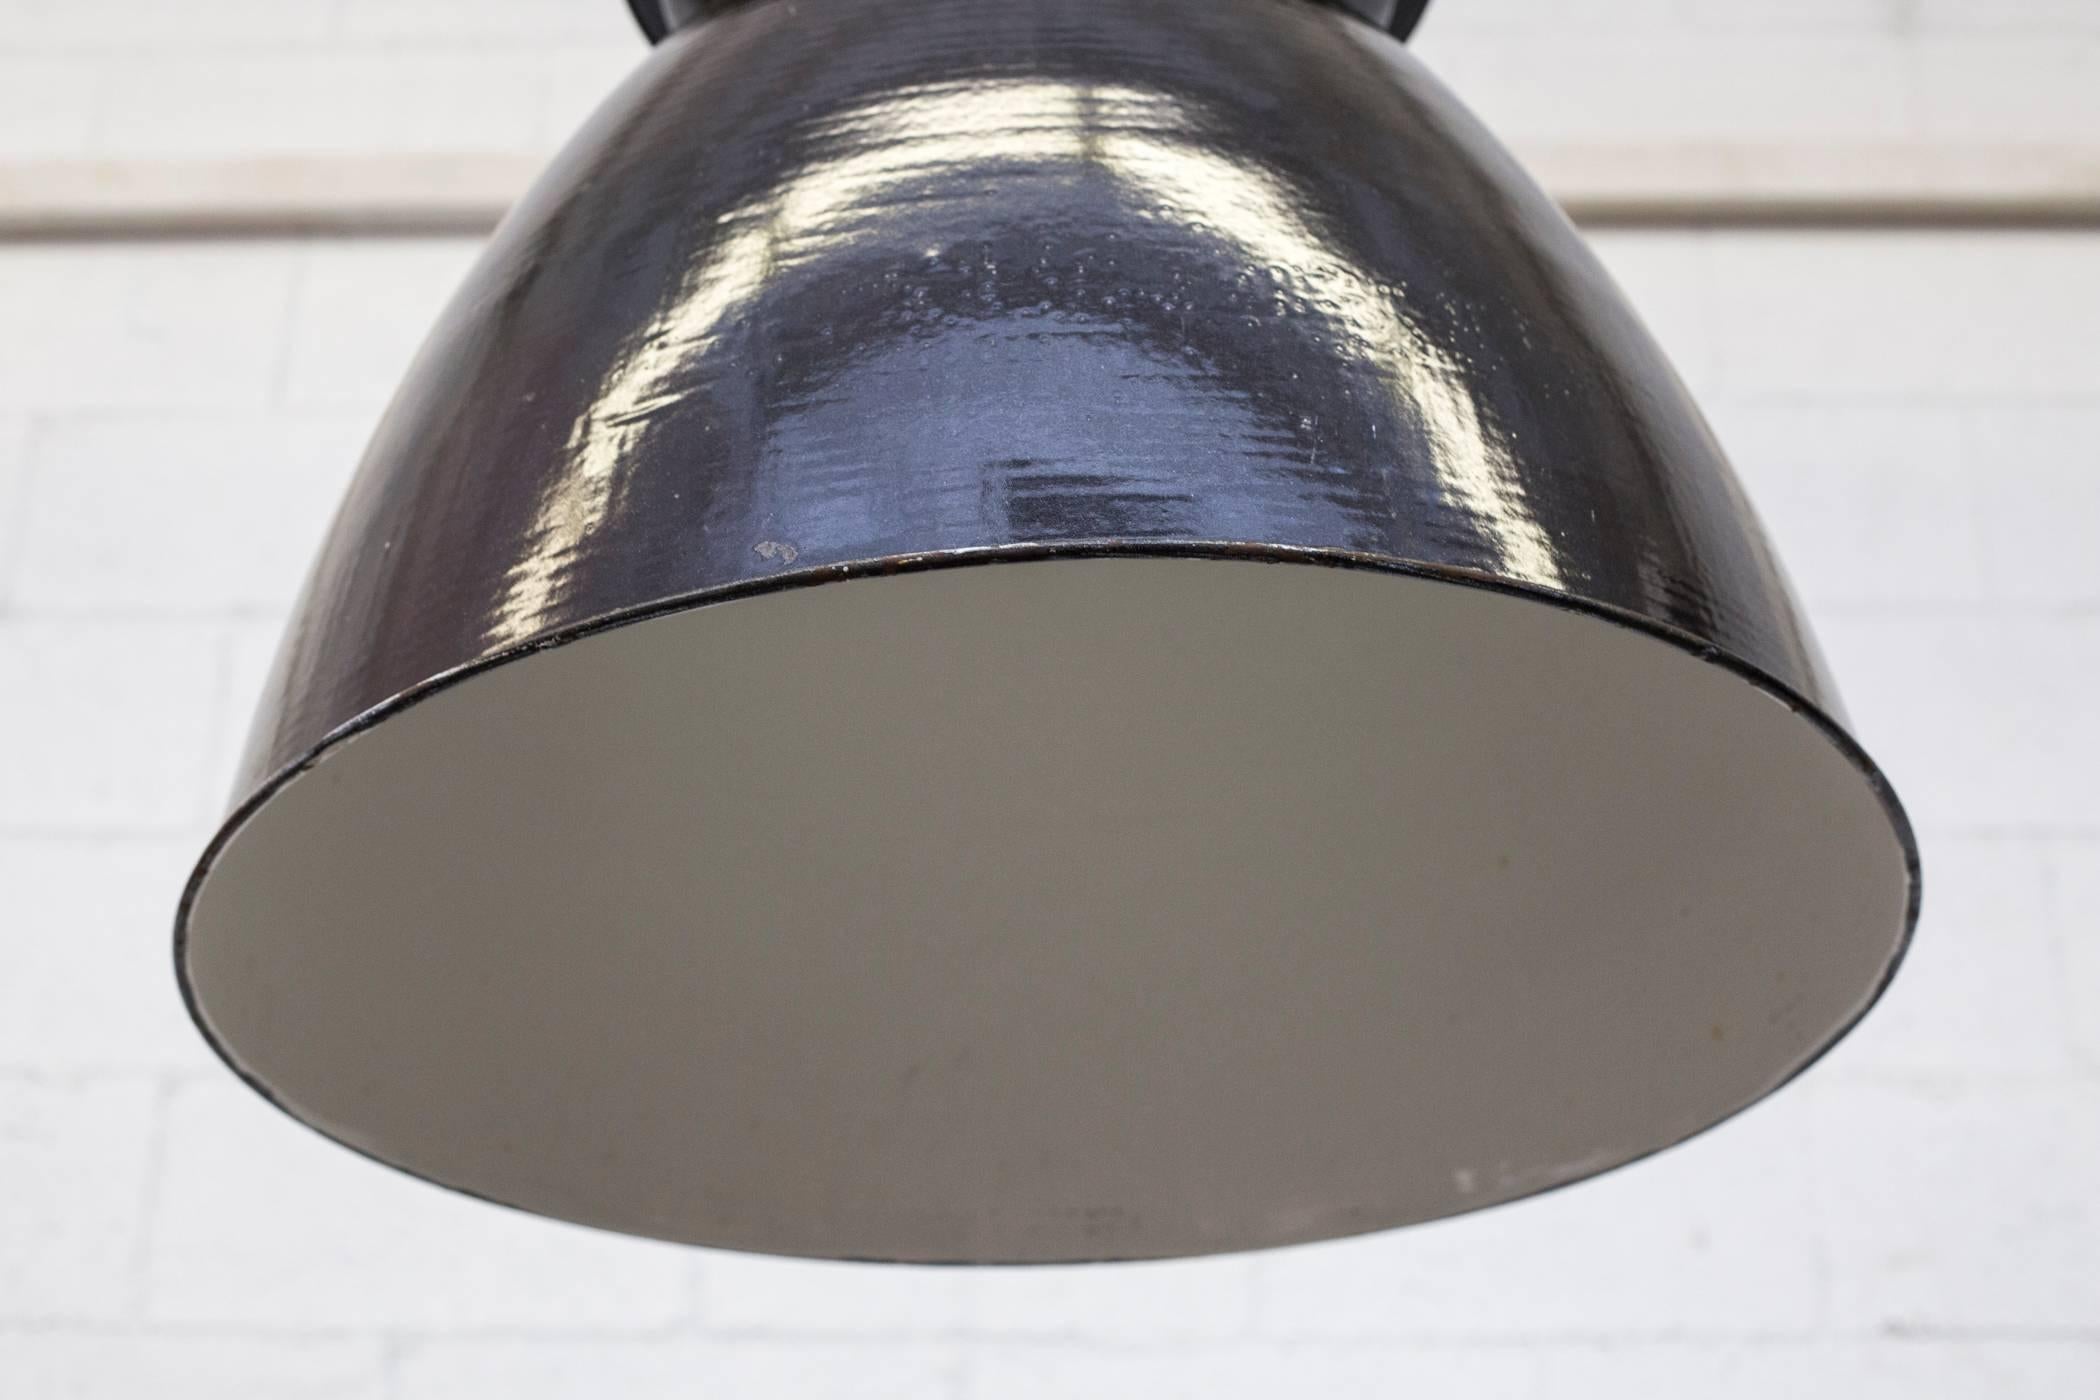 Gorgeous Industrial enameled factory ceiling lamp with black enameled exterior and white enameled interior. All in original condition with visible wear and minimal chipping consistent with age and usage. Other similar lamps in other color tones